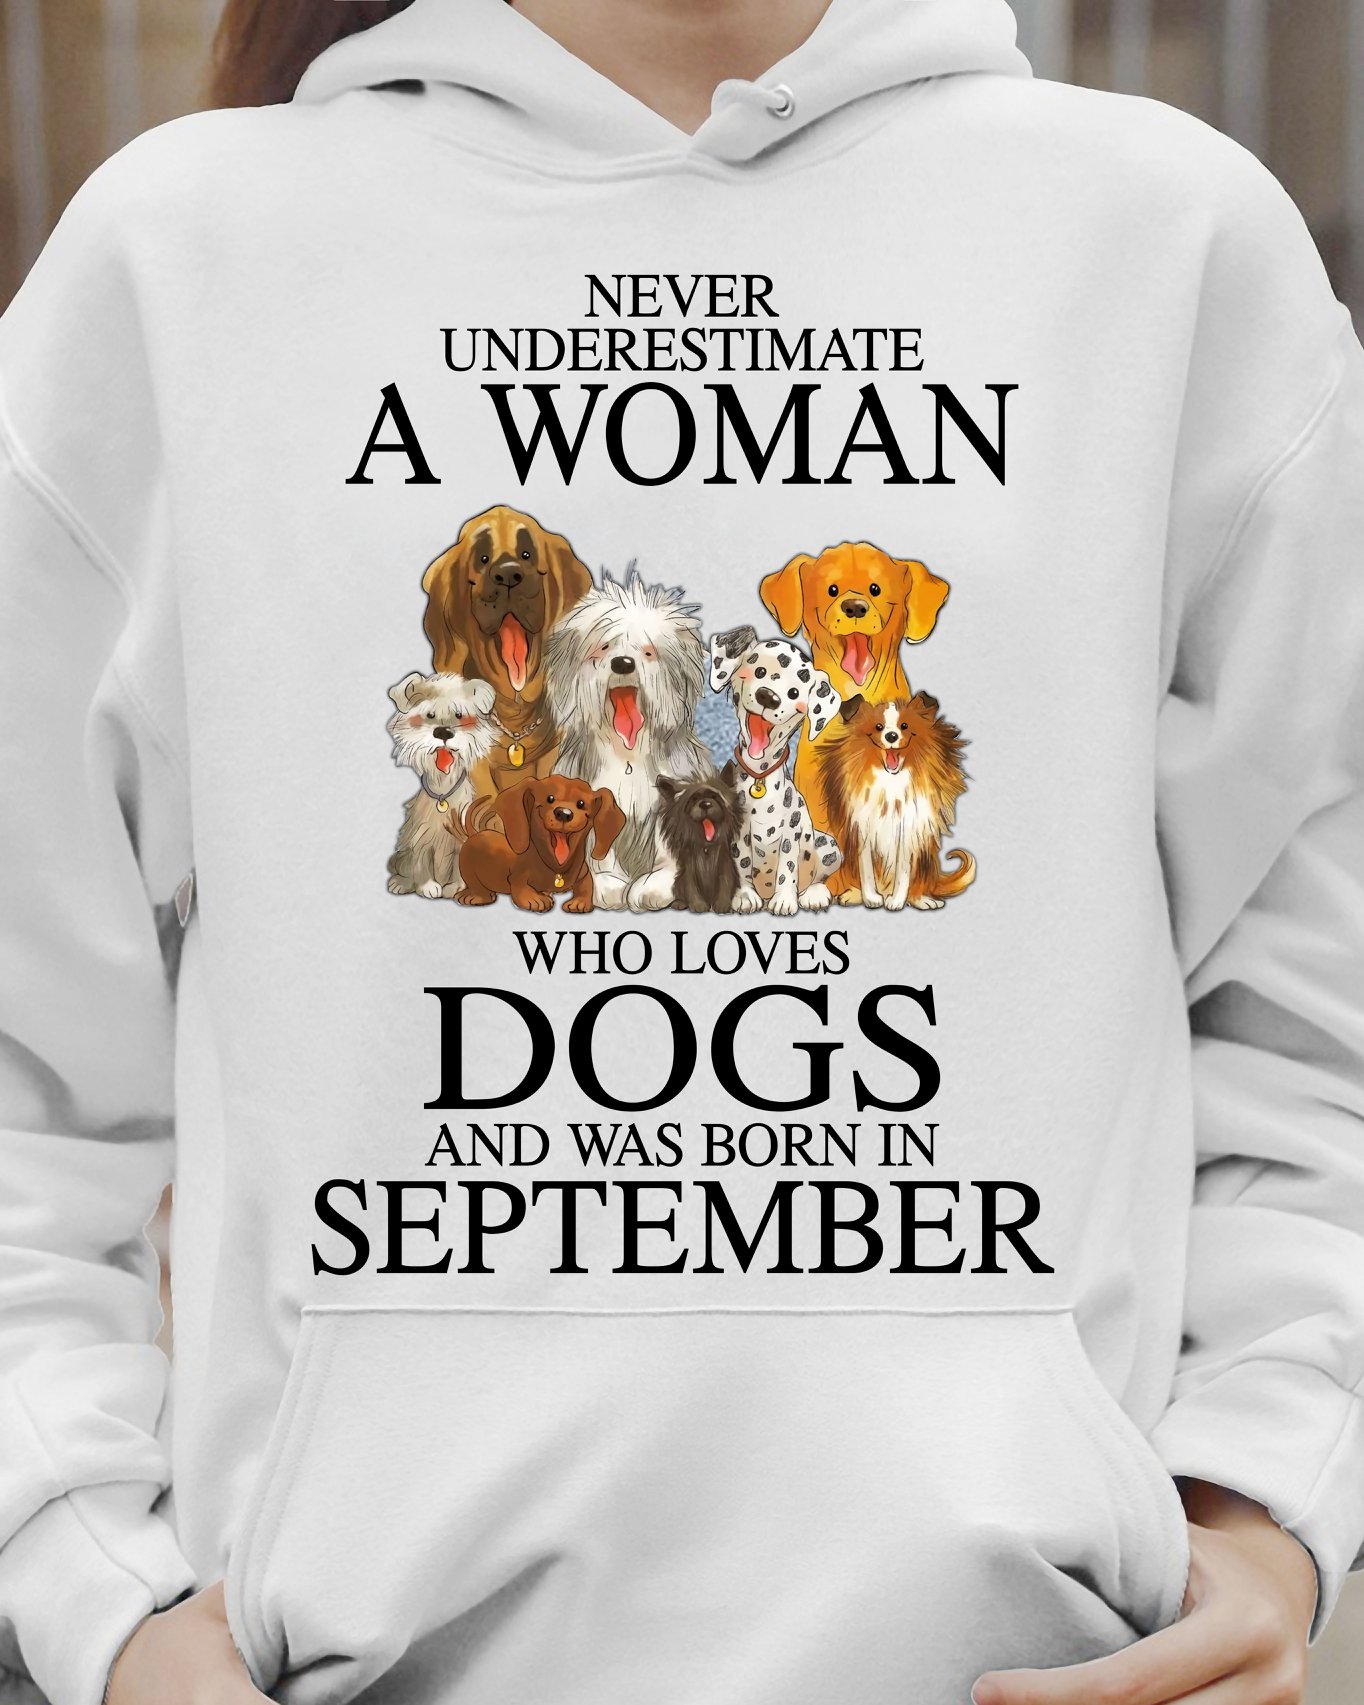 Never underestimate a woman who loves dogs and was born in September